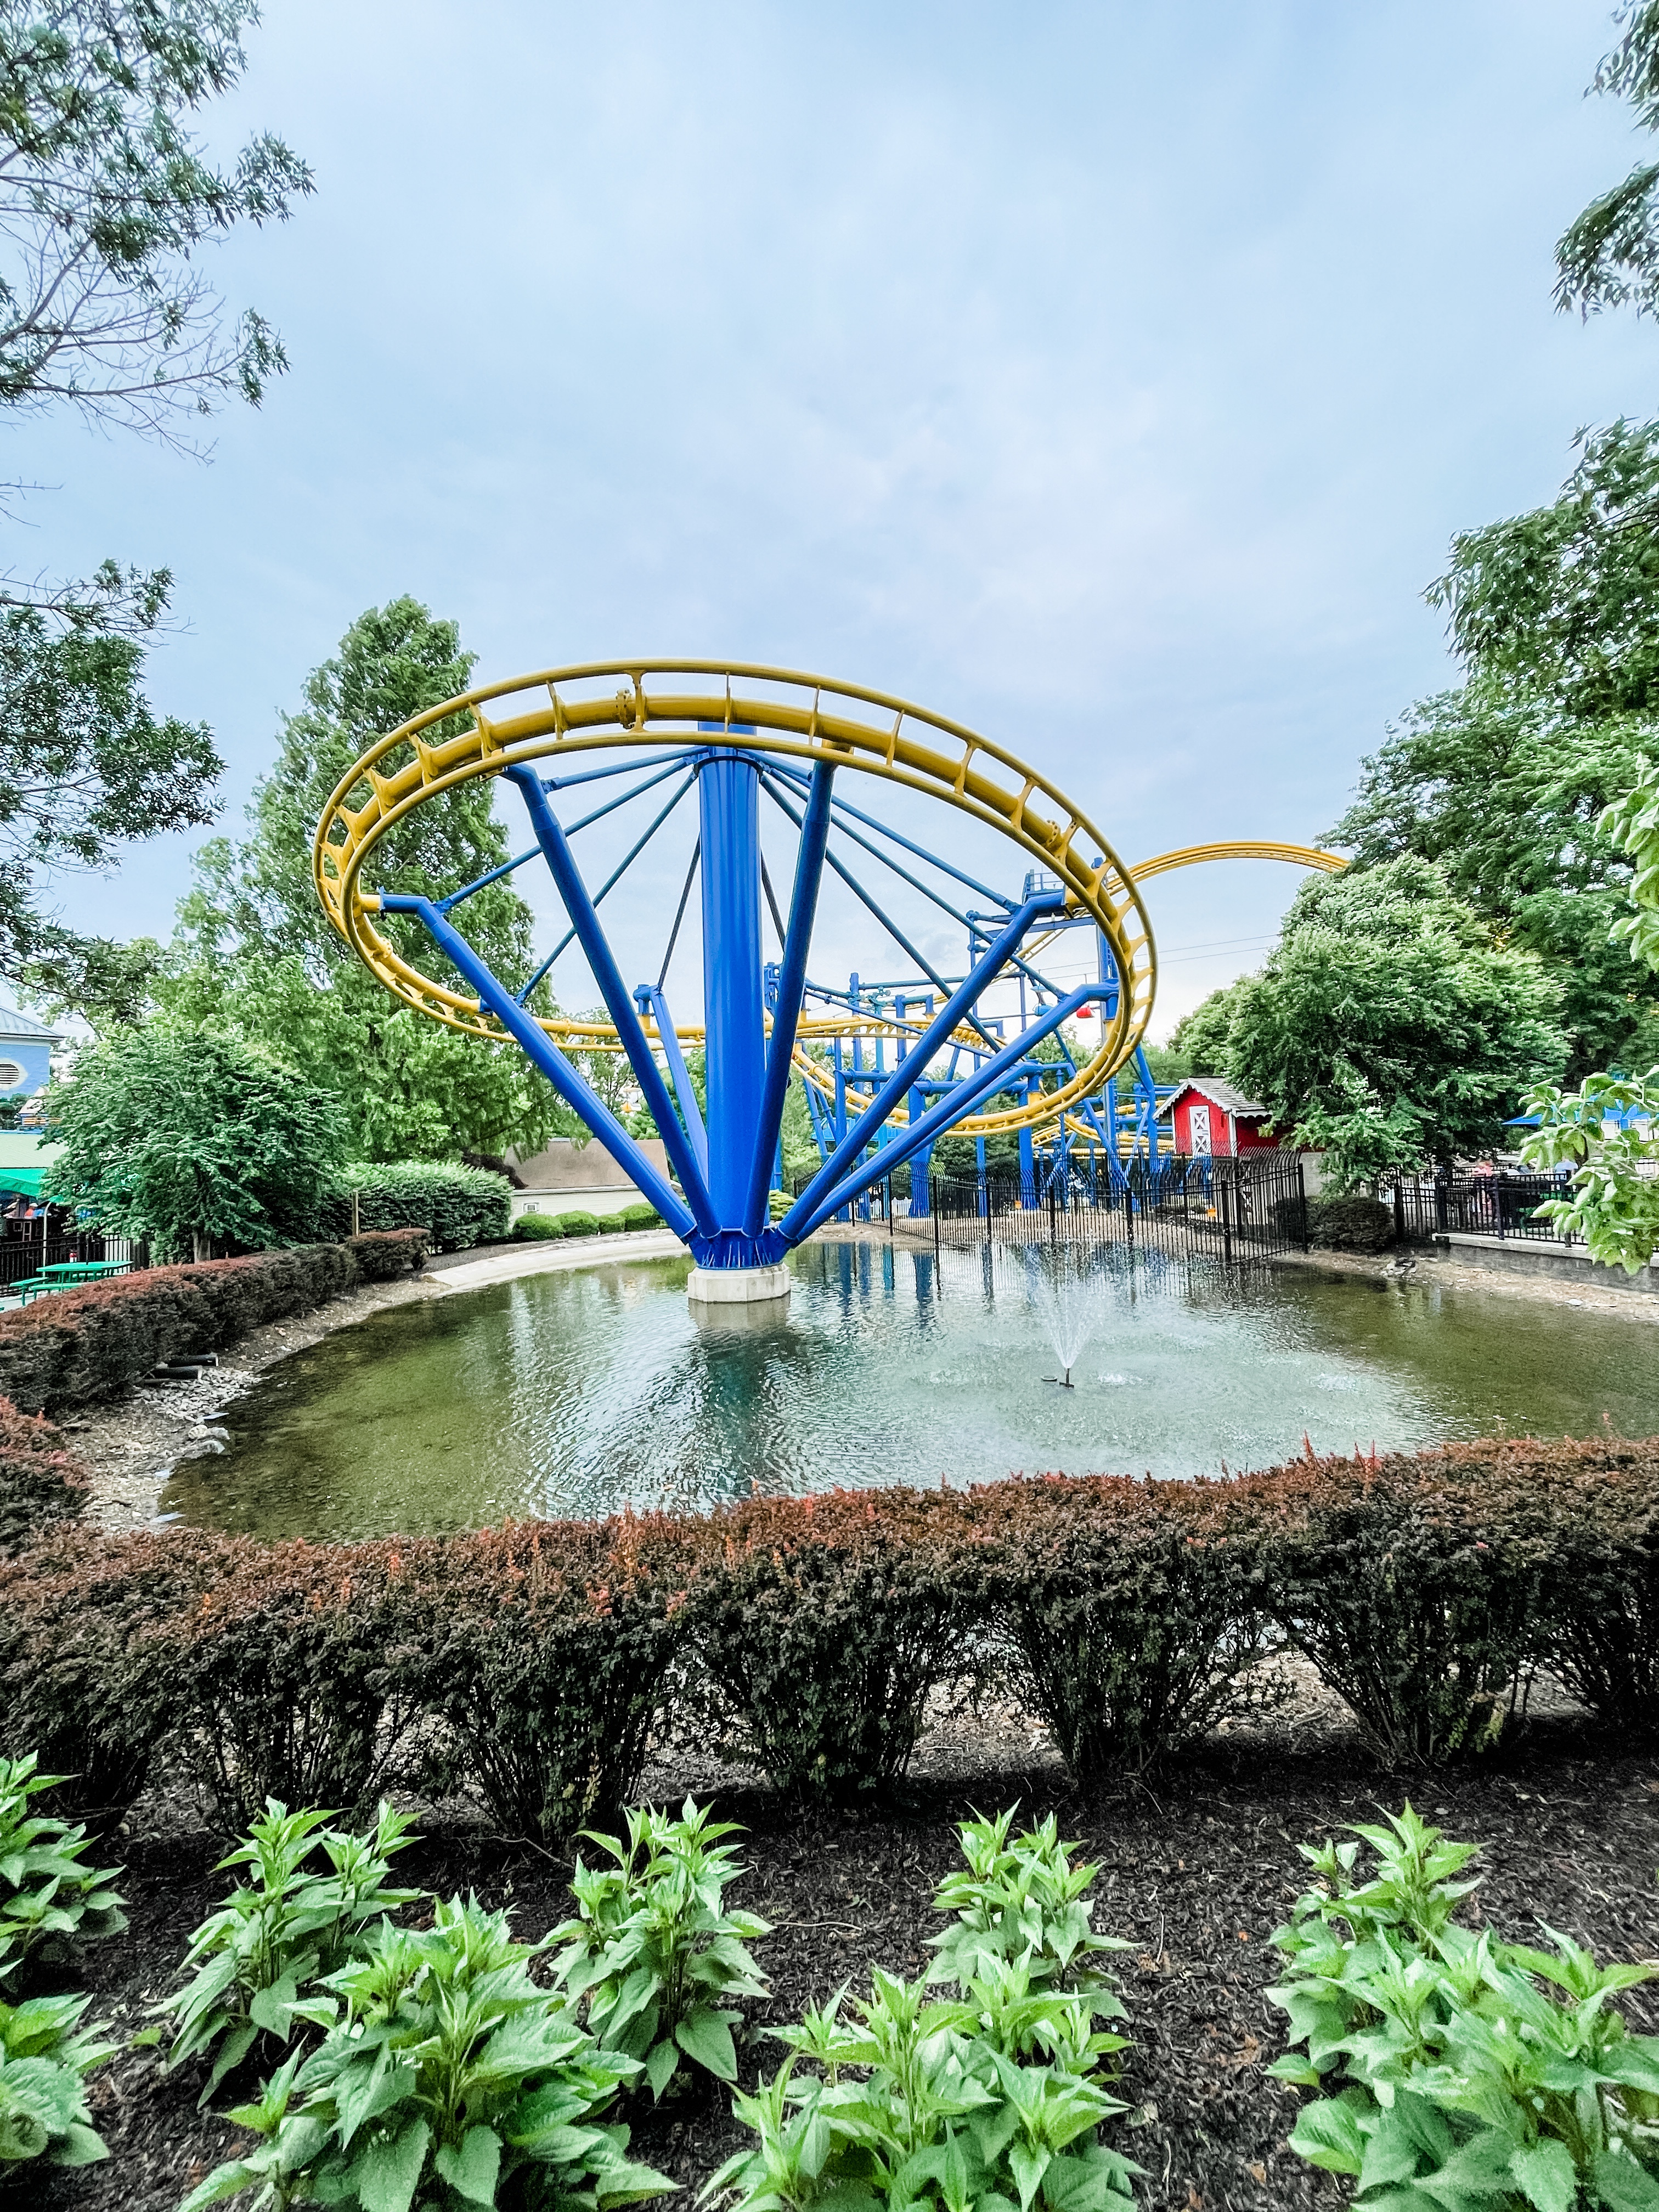 What You Need To Know About The Cartoon Network Hotel And Dutch Wonderland  — My Cruising Family